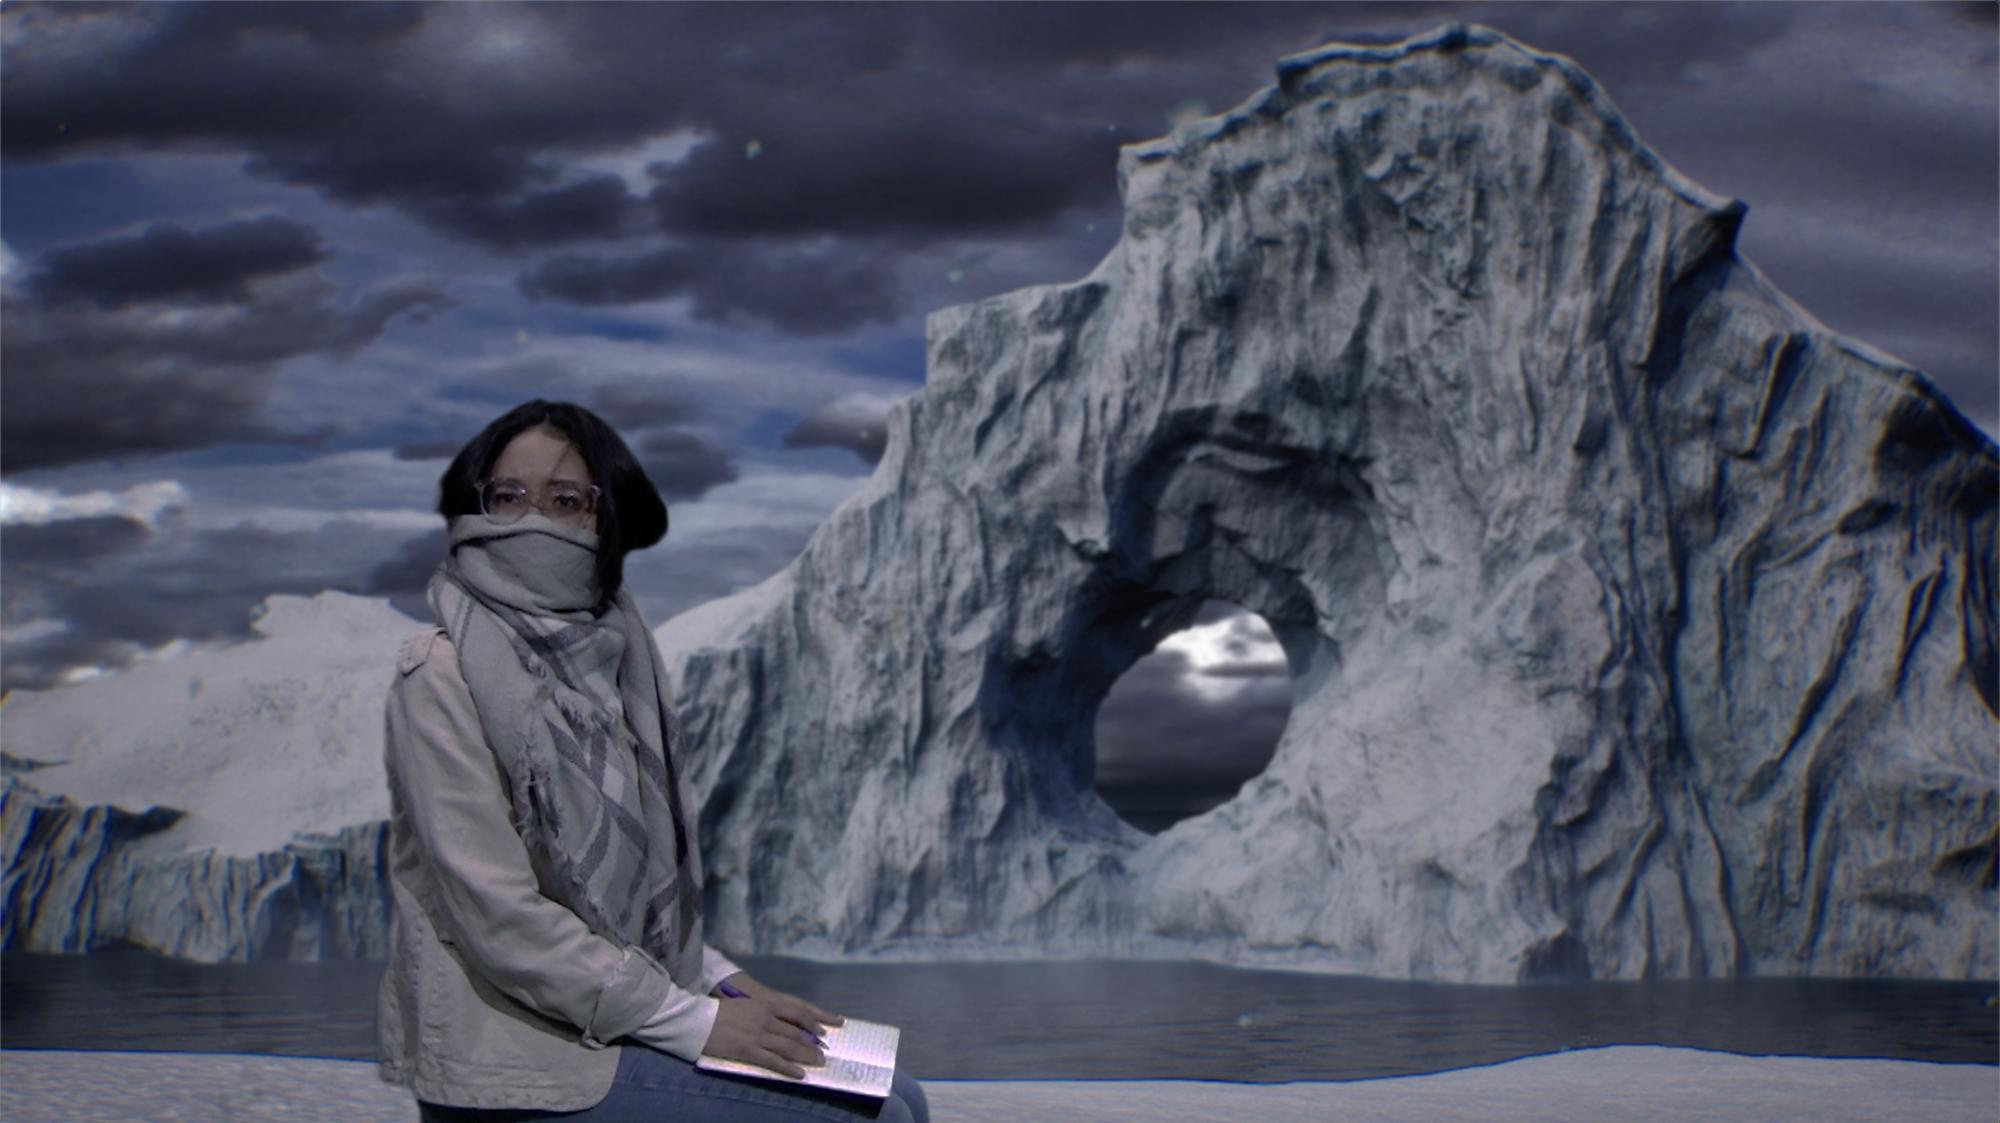 woman with a scarf around her mouth and nose looks to her side with a concerned expression, seated in front of an icy Antarctic background